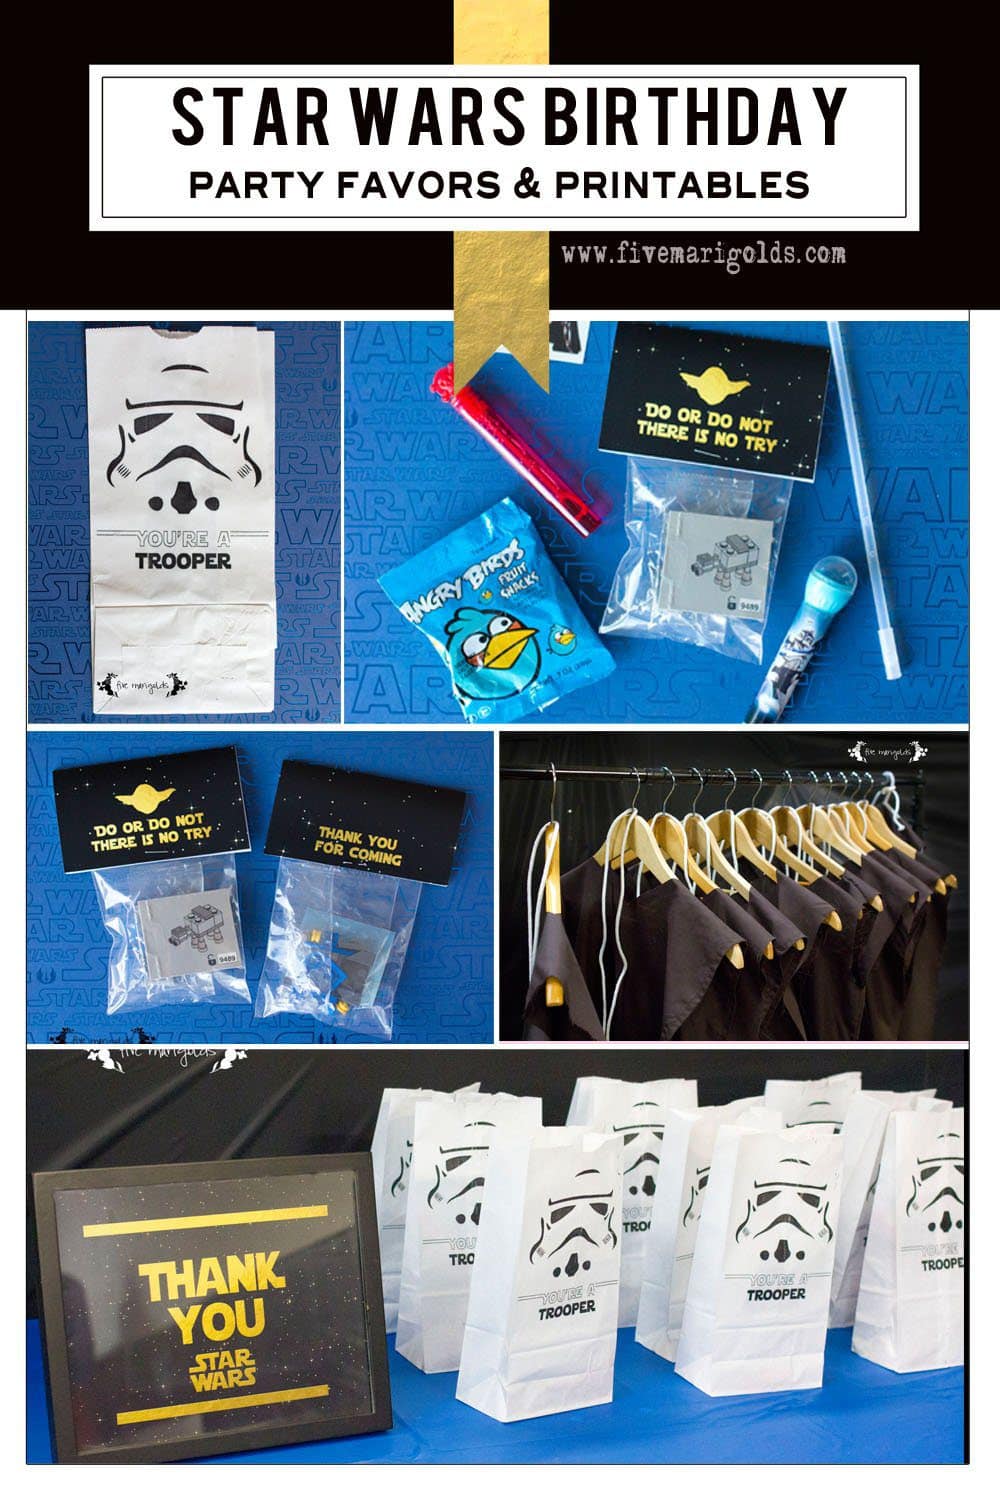 Super creative ideas for Star Wars Birthday favors with Legos